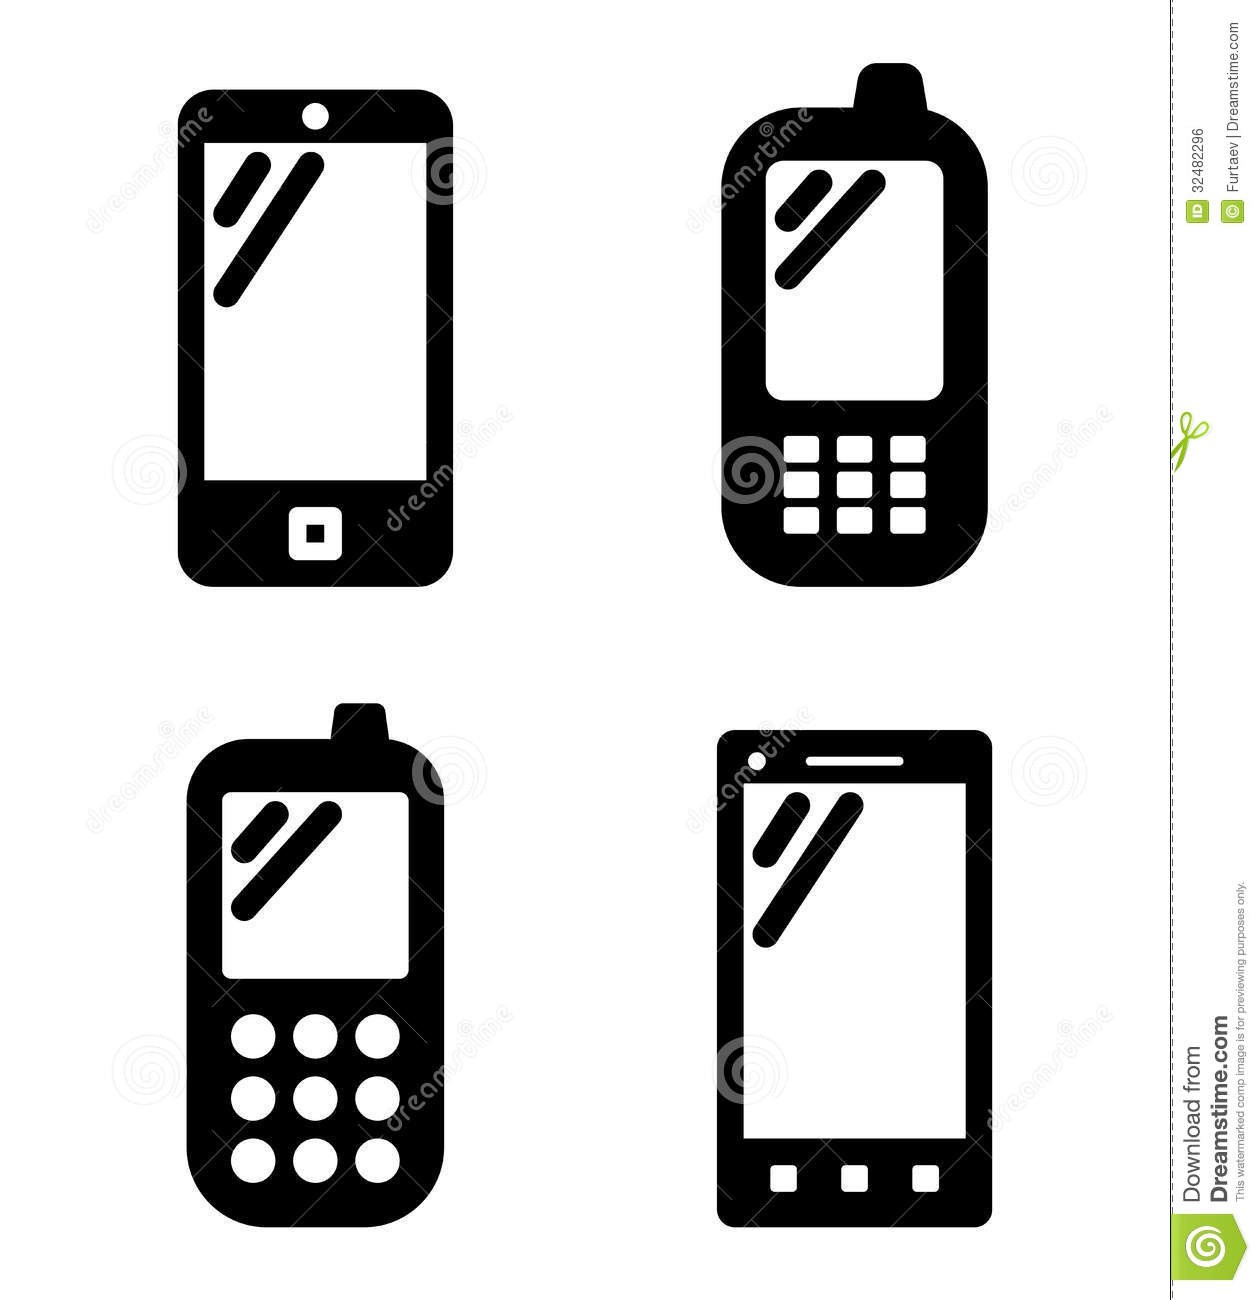 Cell Phone Signs Stock Vector Illustration Of Design 32482296 Free Mobile